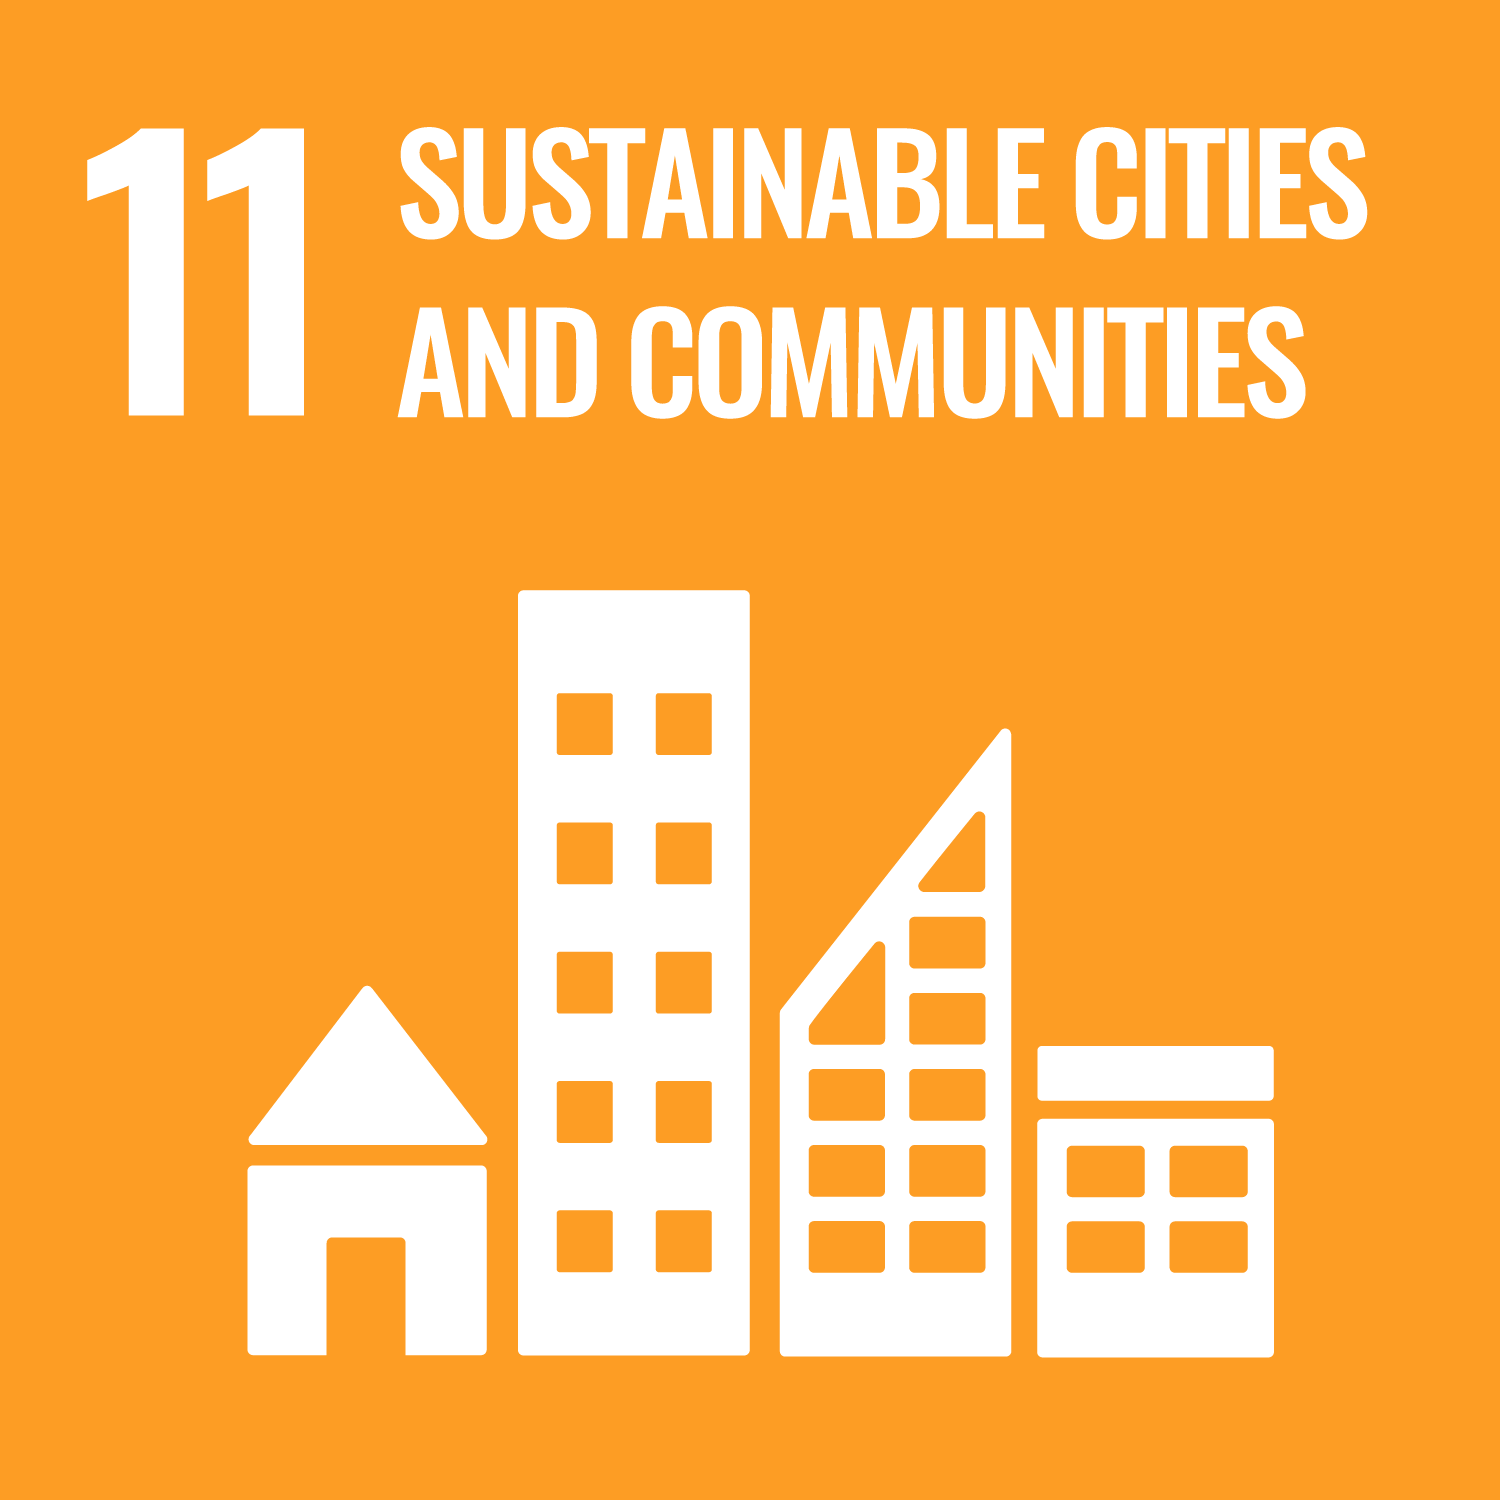 United Nations Sustainable Development Goal Number 11 Sustainable Cities and Communities